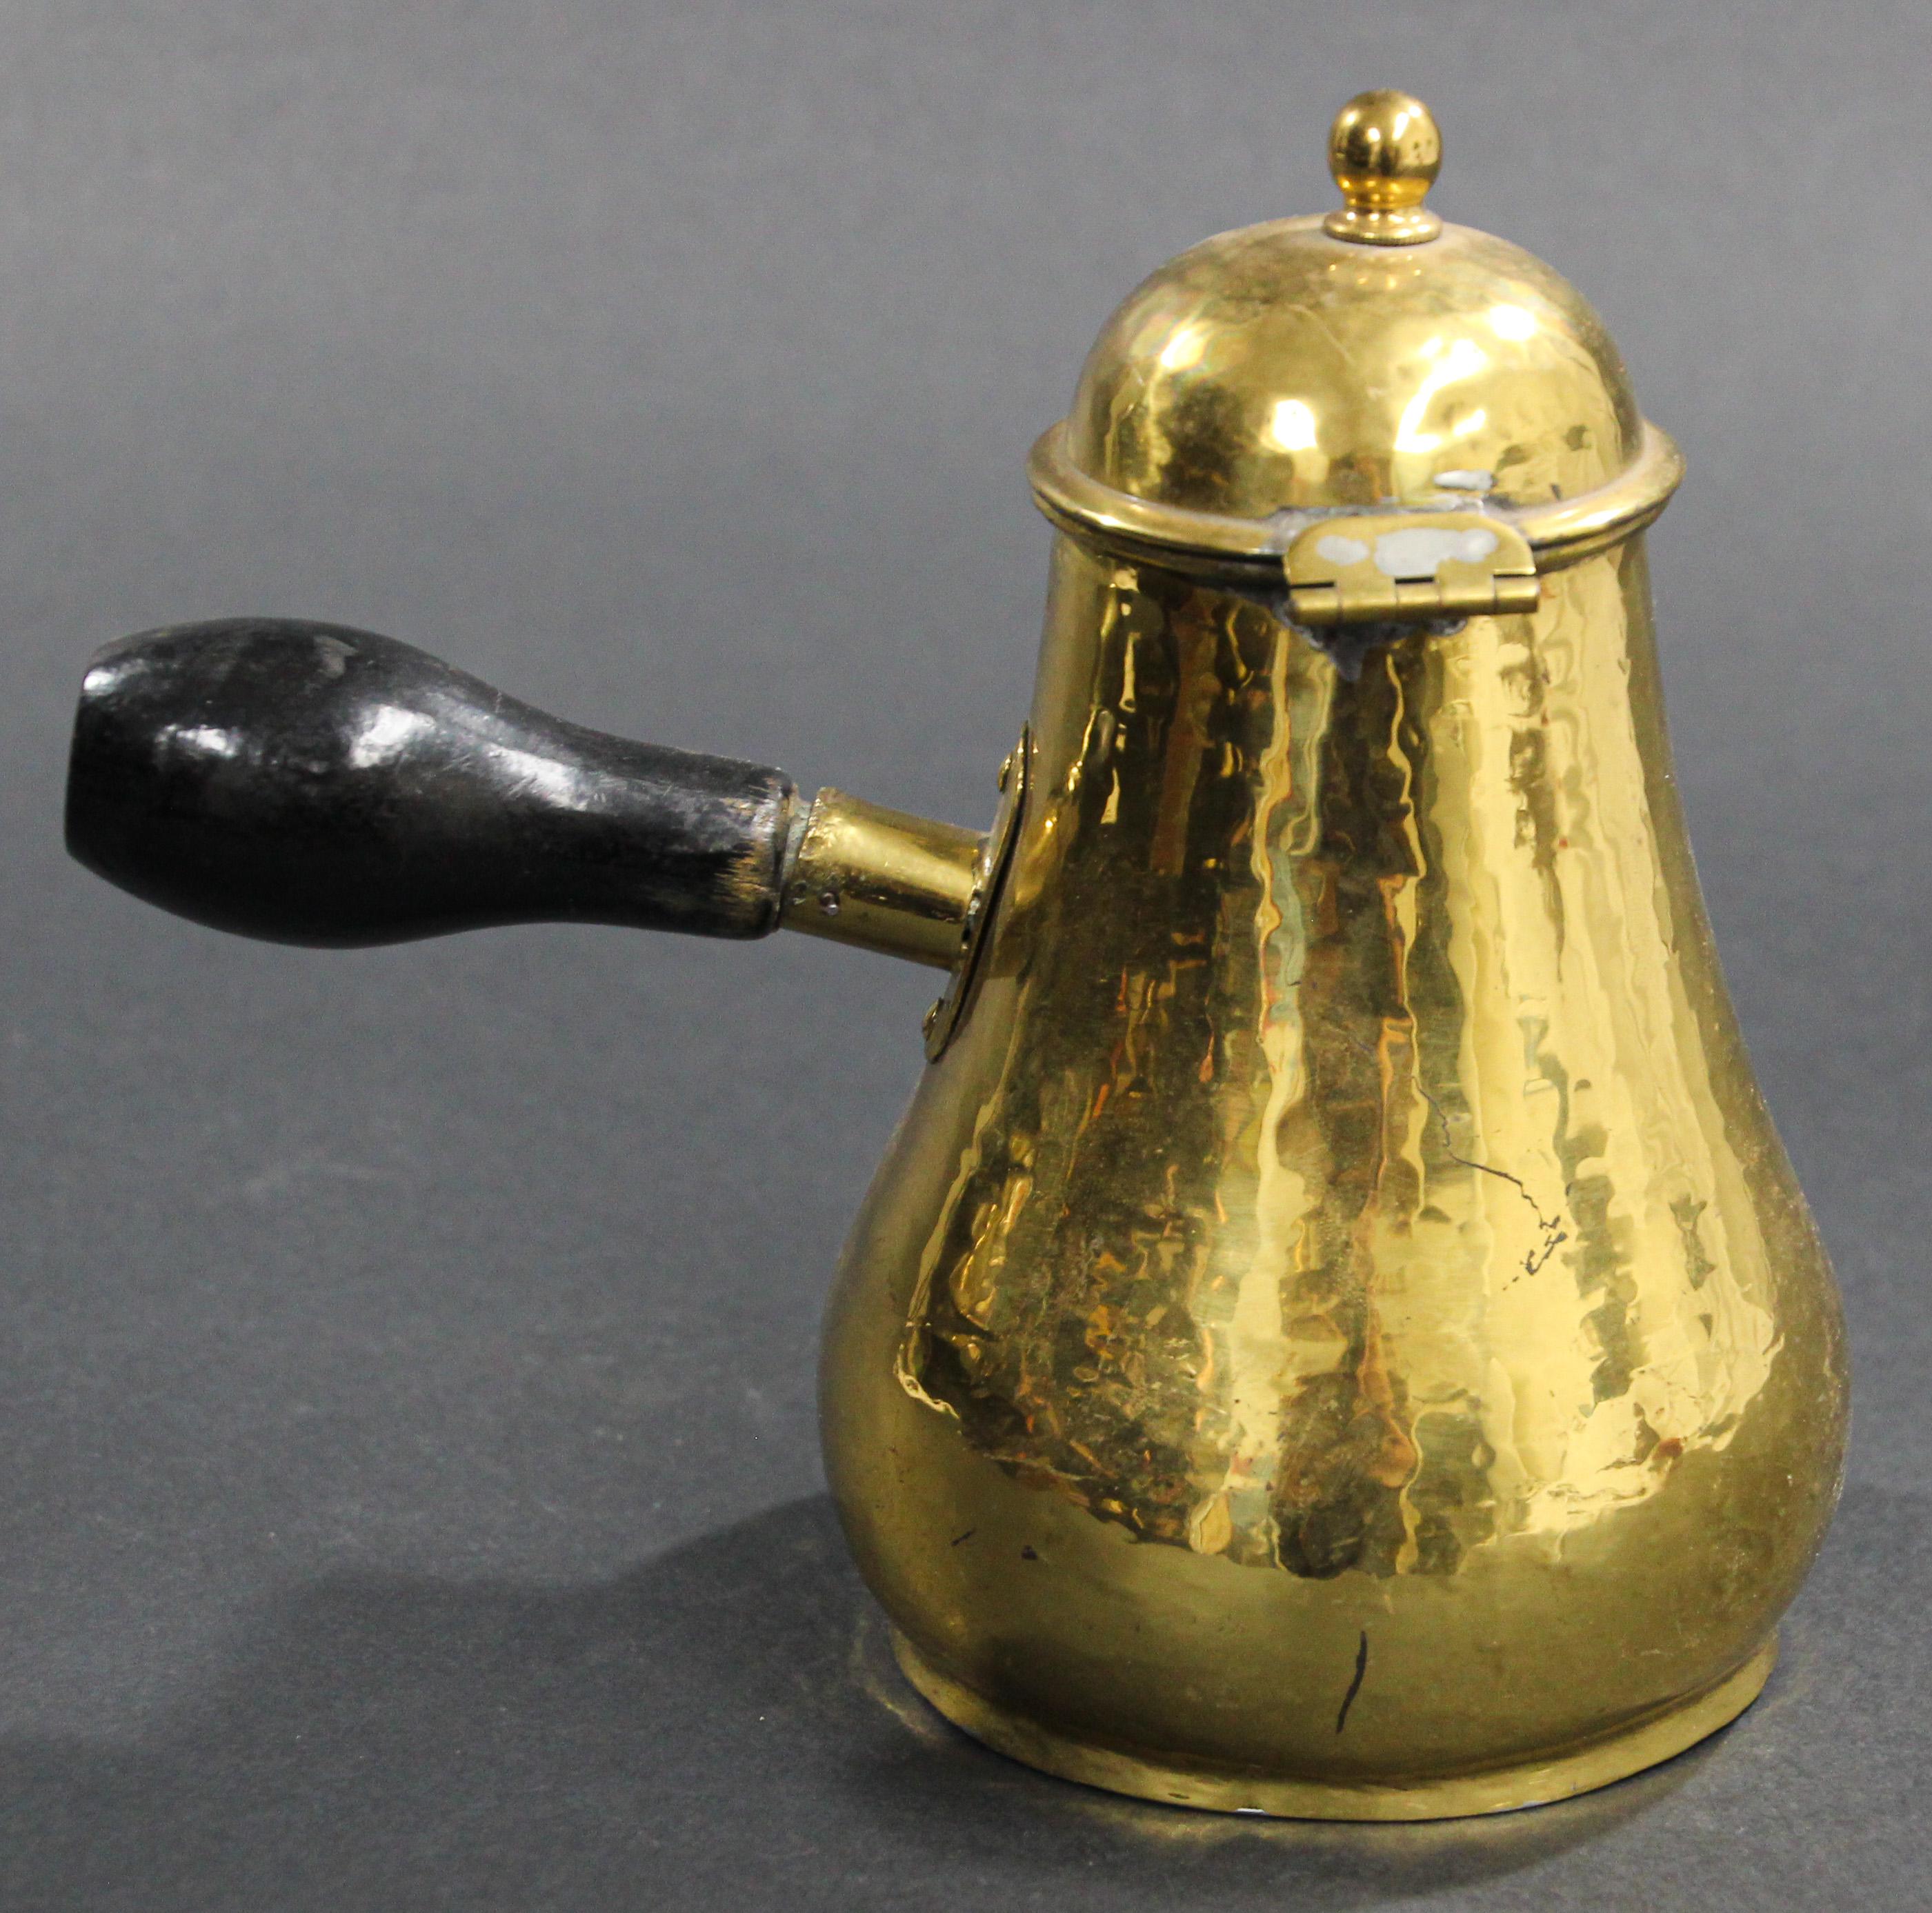 19th Century Antique English Polished Brass Chocolate or Coffee Pot